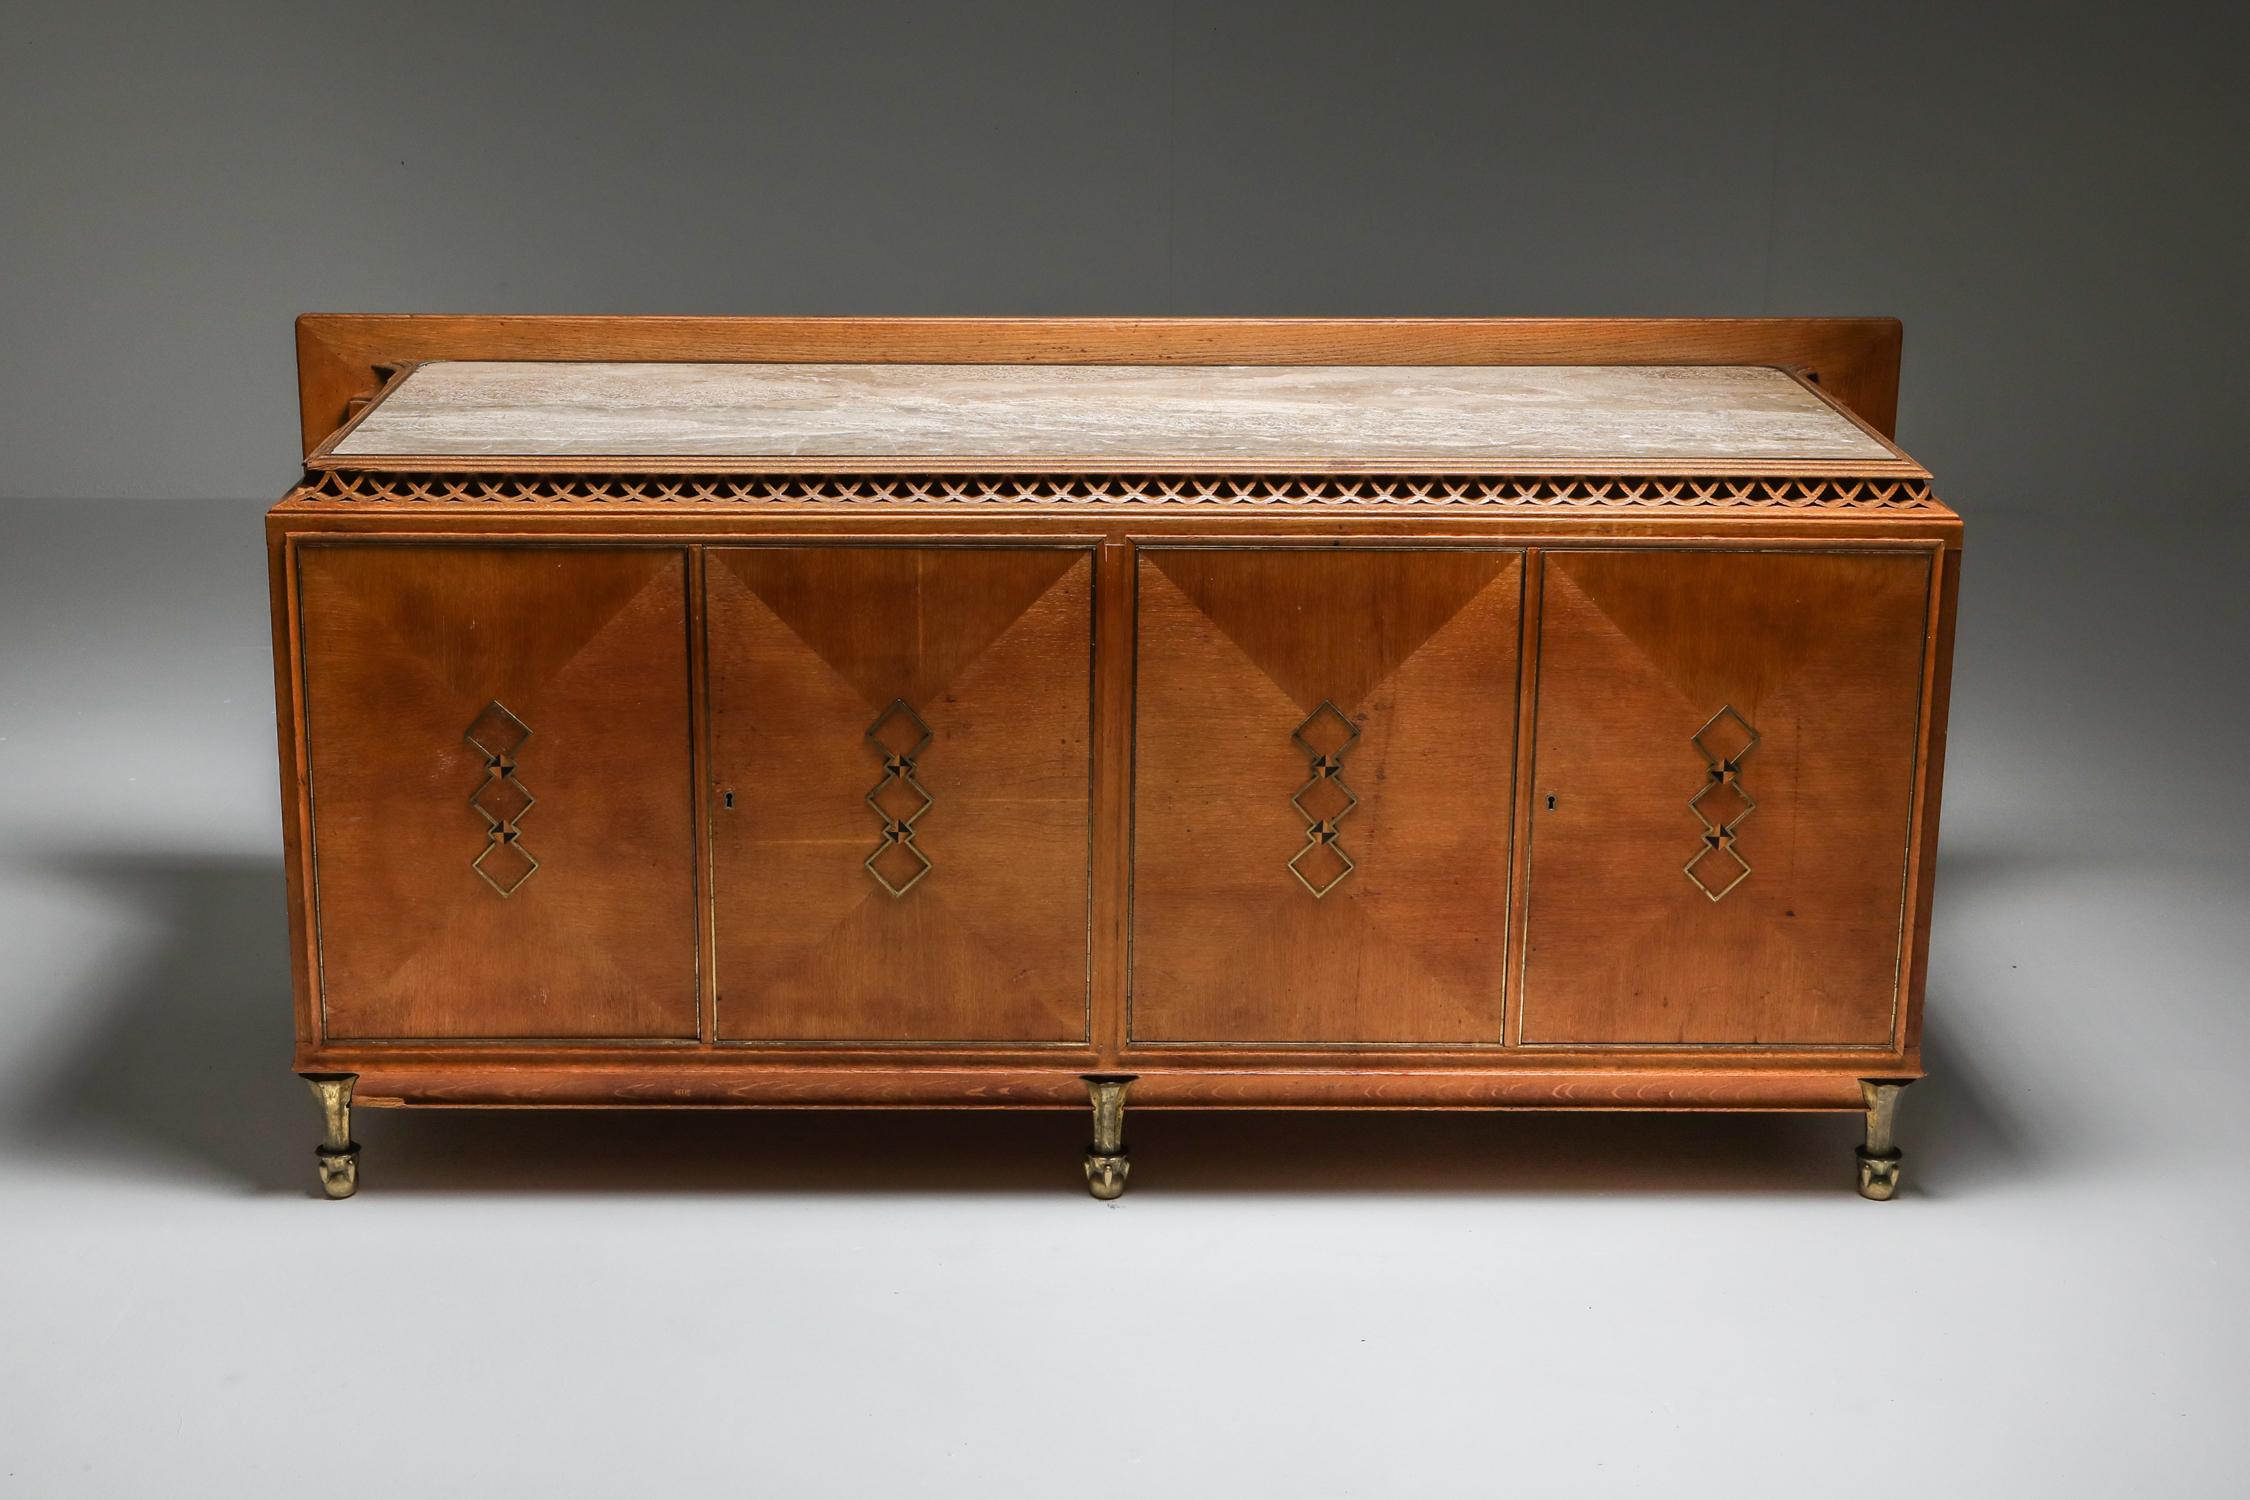 Art Deco style high-end sideboard with stunning details, France, 1930s

Luxury storage piece, marble top, bronze feet, carved oak.

Previously owned by an architect who had the inside converted to store his drawings.
We have two pieces